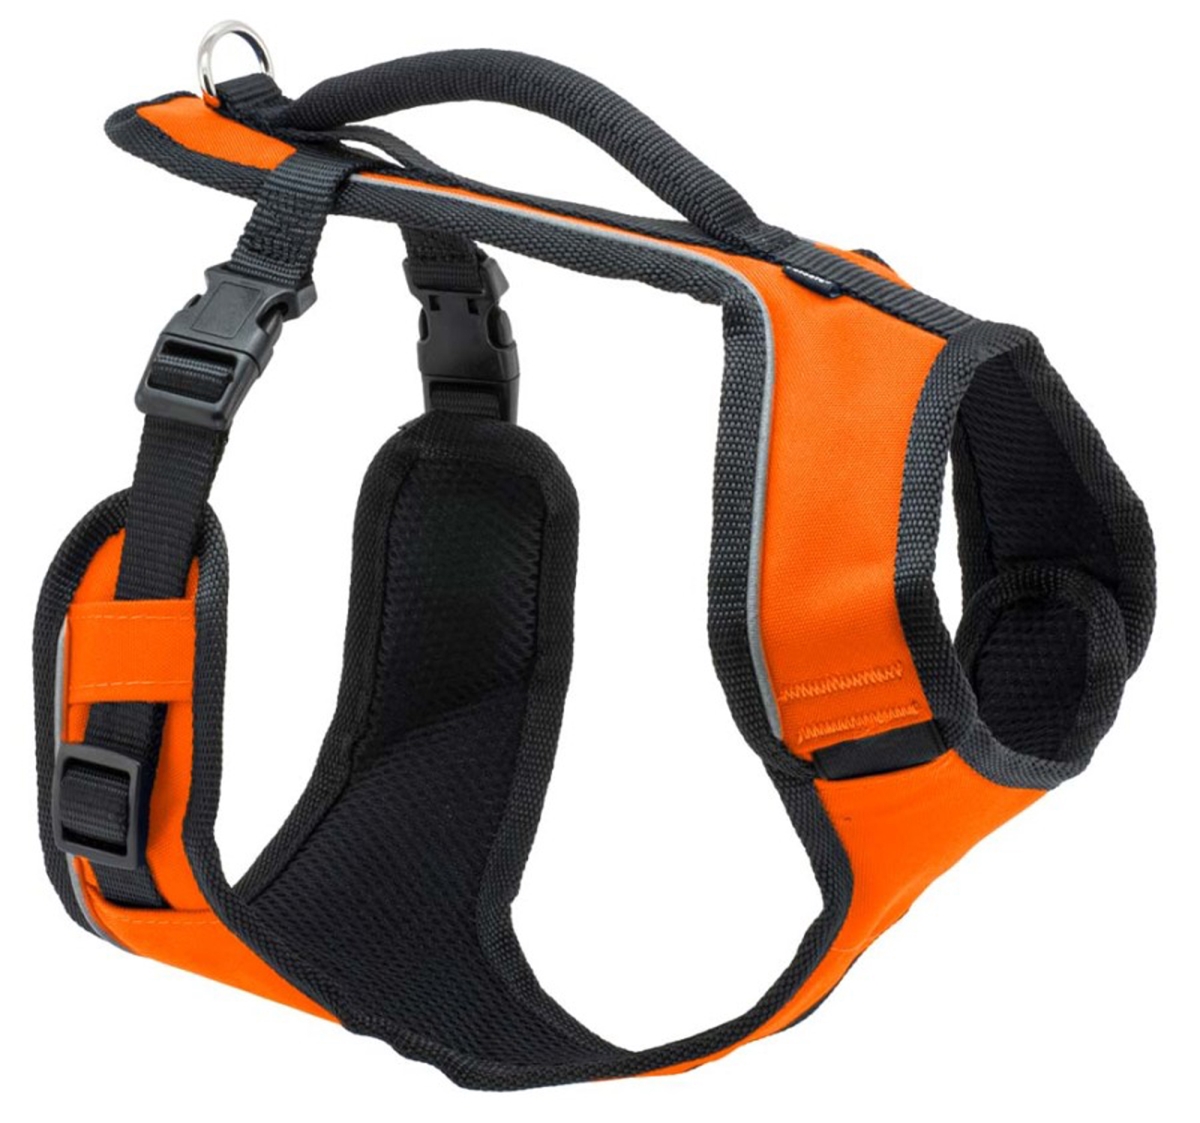 Picture of Radio Systems 729849167124 Petsafe Easysport Comfortable Dog Harness, Orange - Large